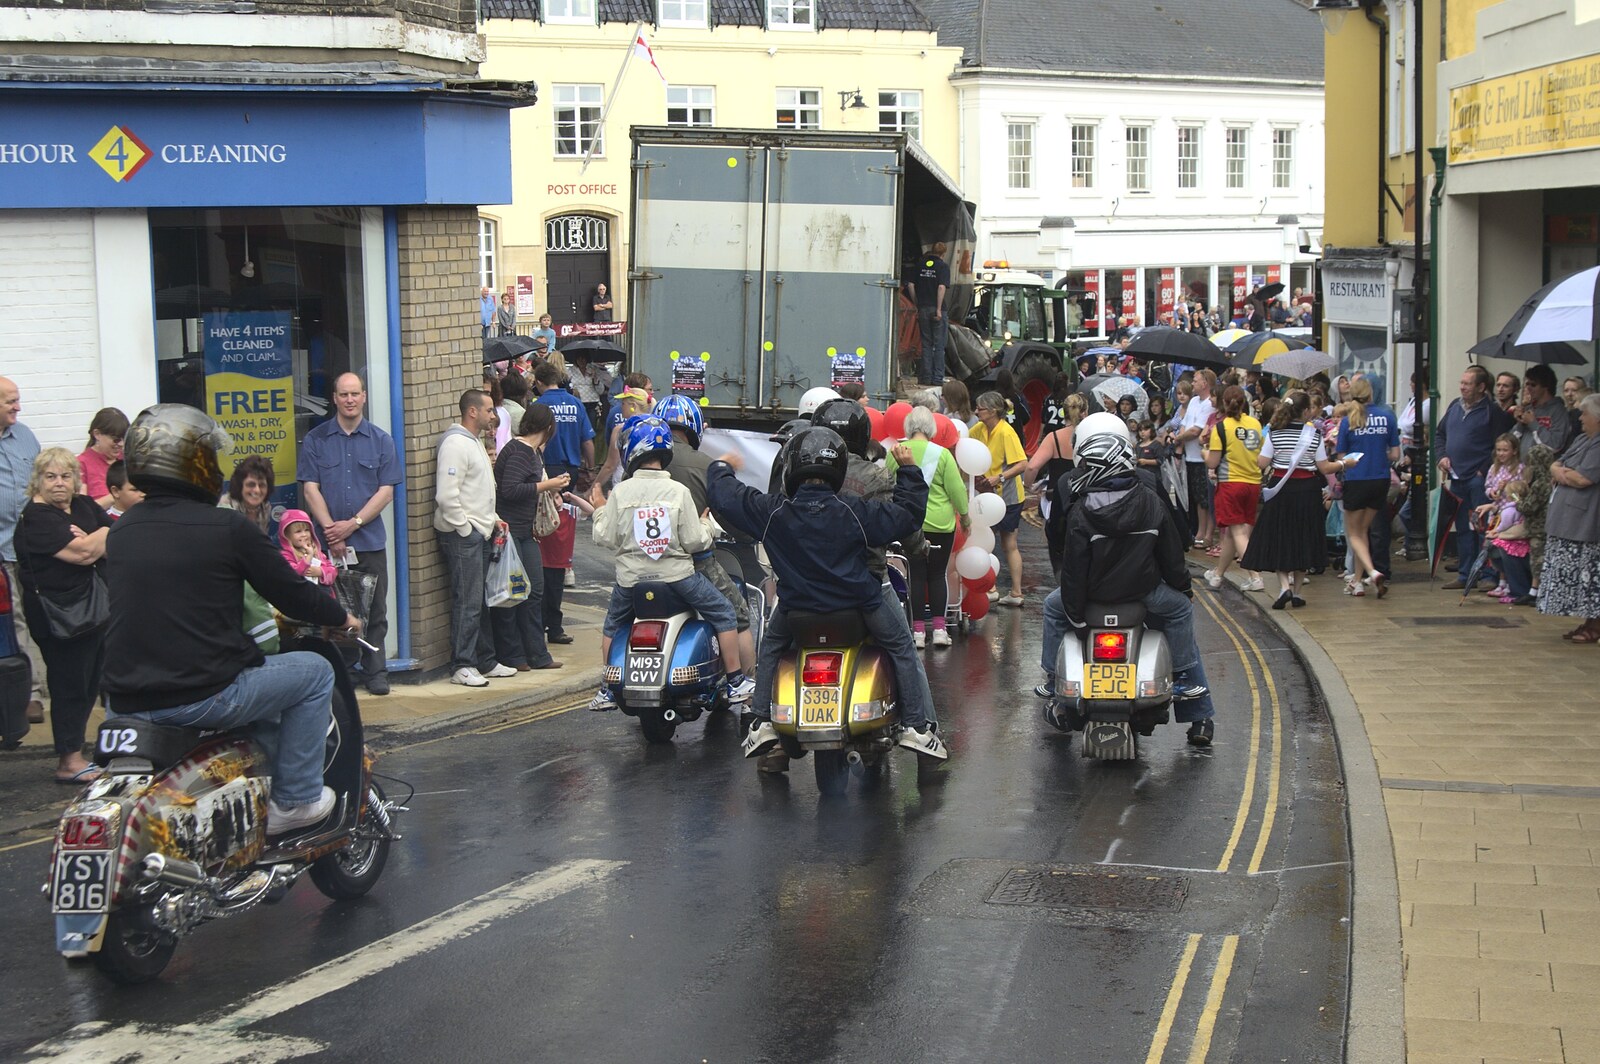 More mopeds ride down the hill from Diss Carnival Procession, Diss, Norfolk - 21st June 2009